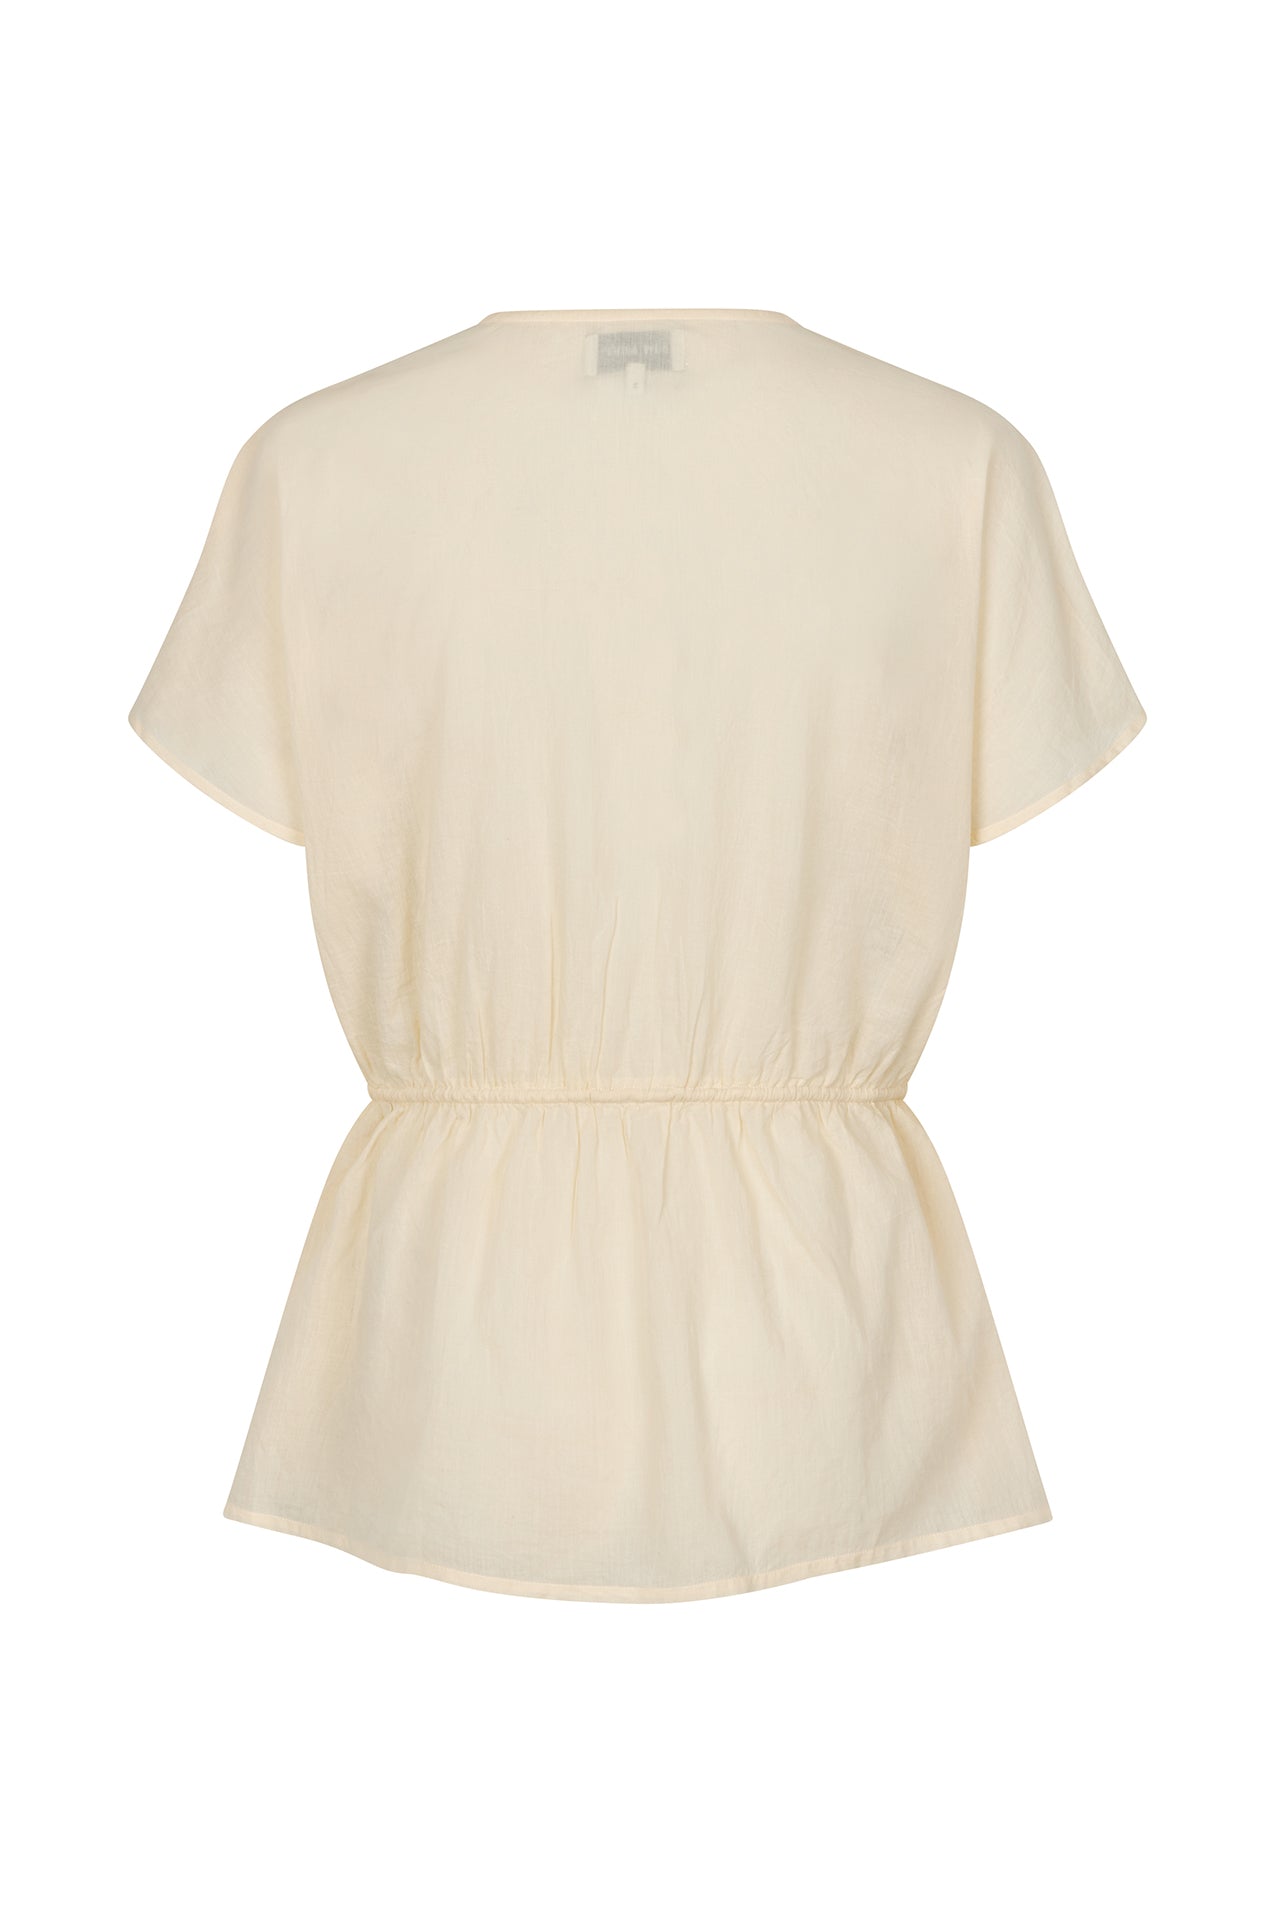 Lollys Laundry EastonLL Top SL Top 02 Creme